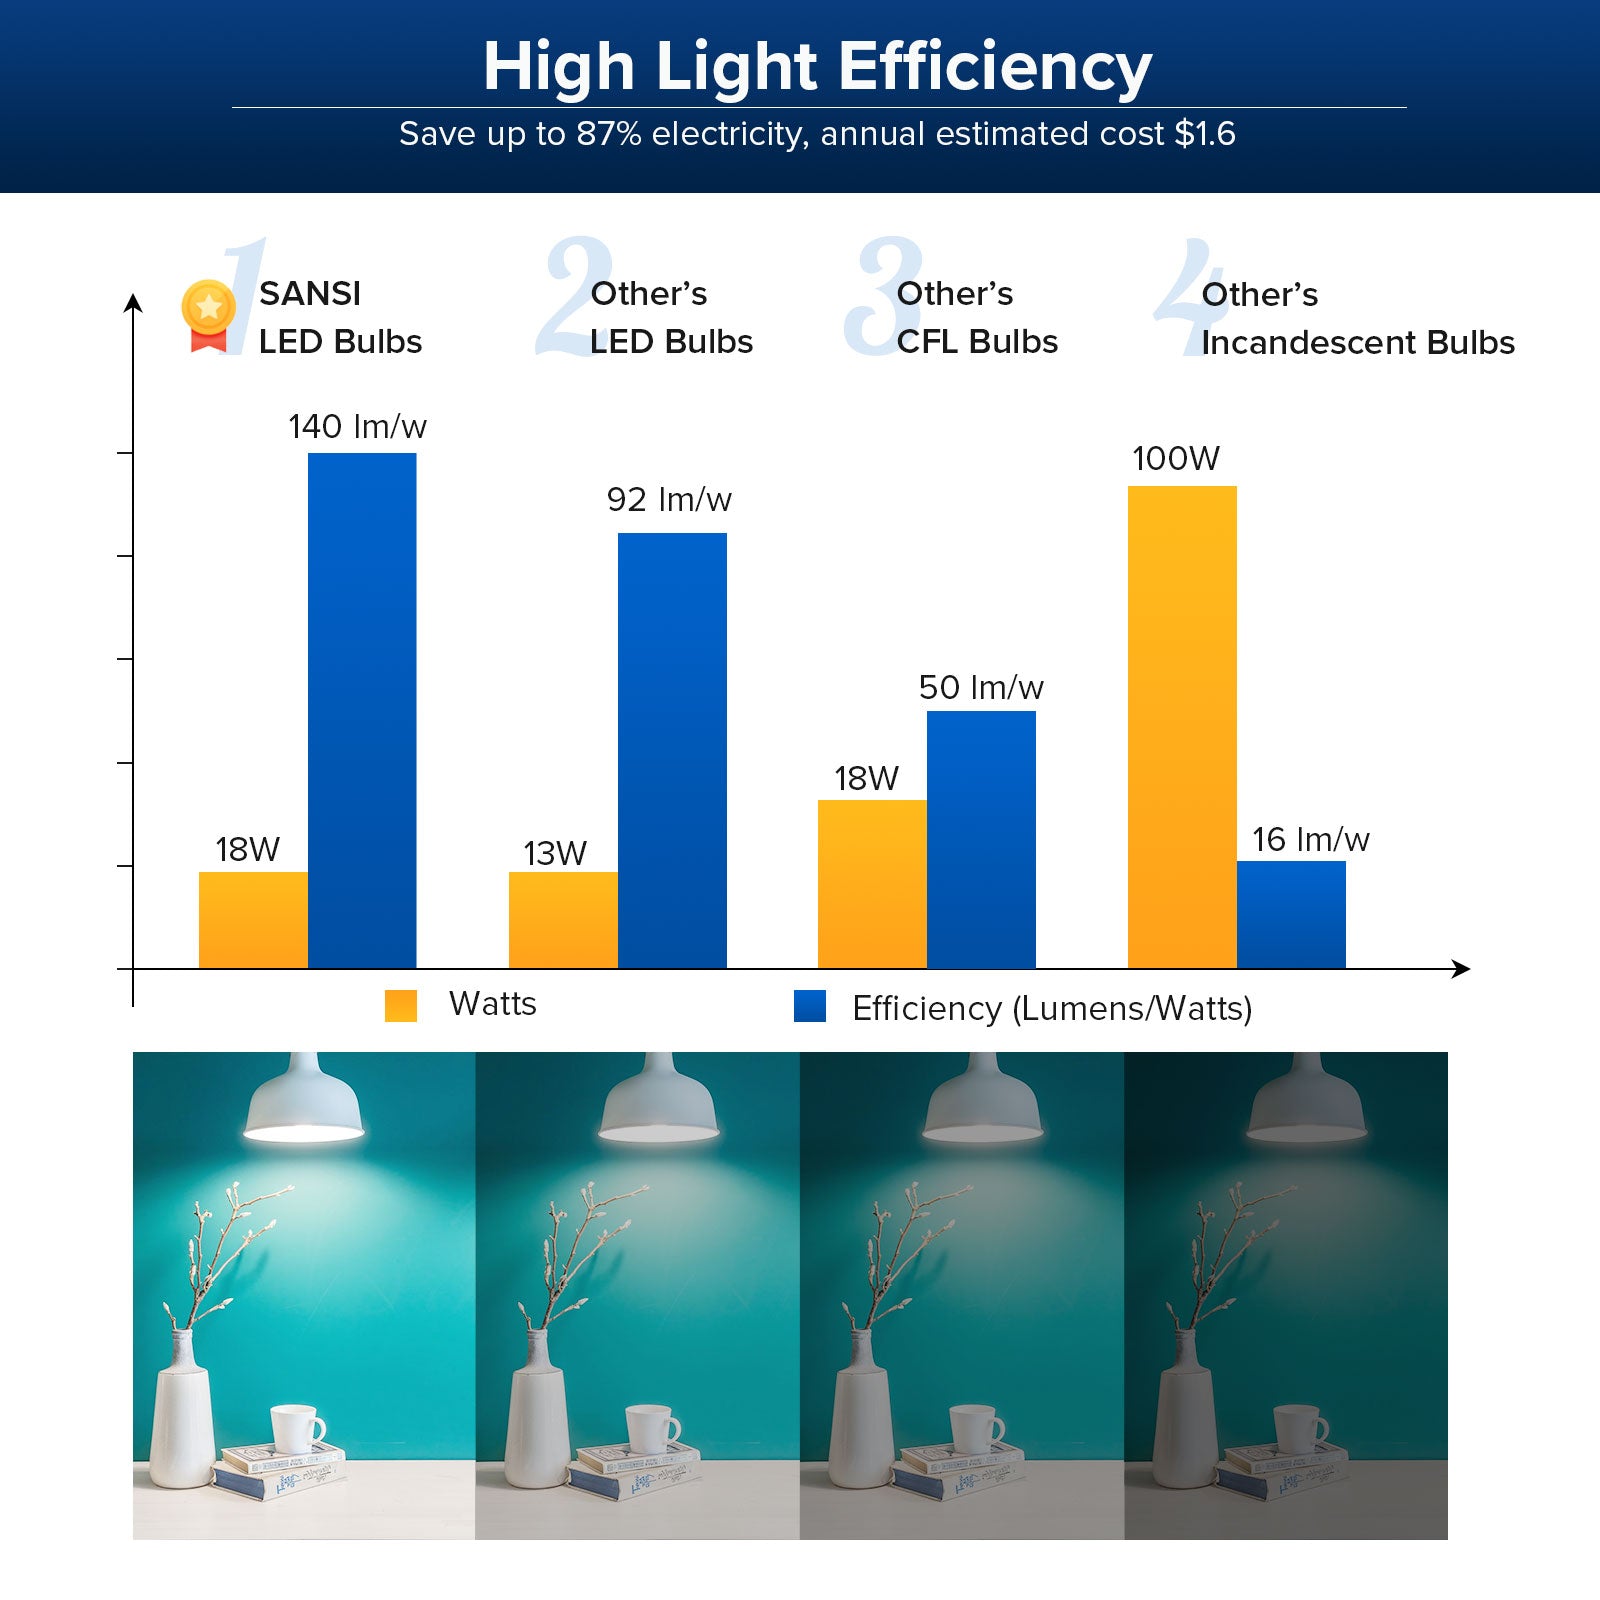 Upgraded A21 18W led light bulb has high light efficiency, save up to 87% electricity, annual estimated cost  $1.6